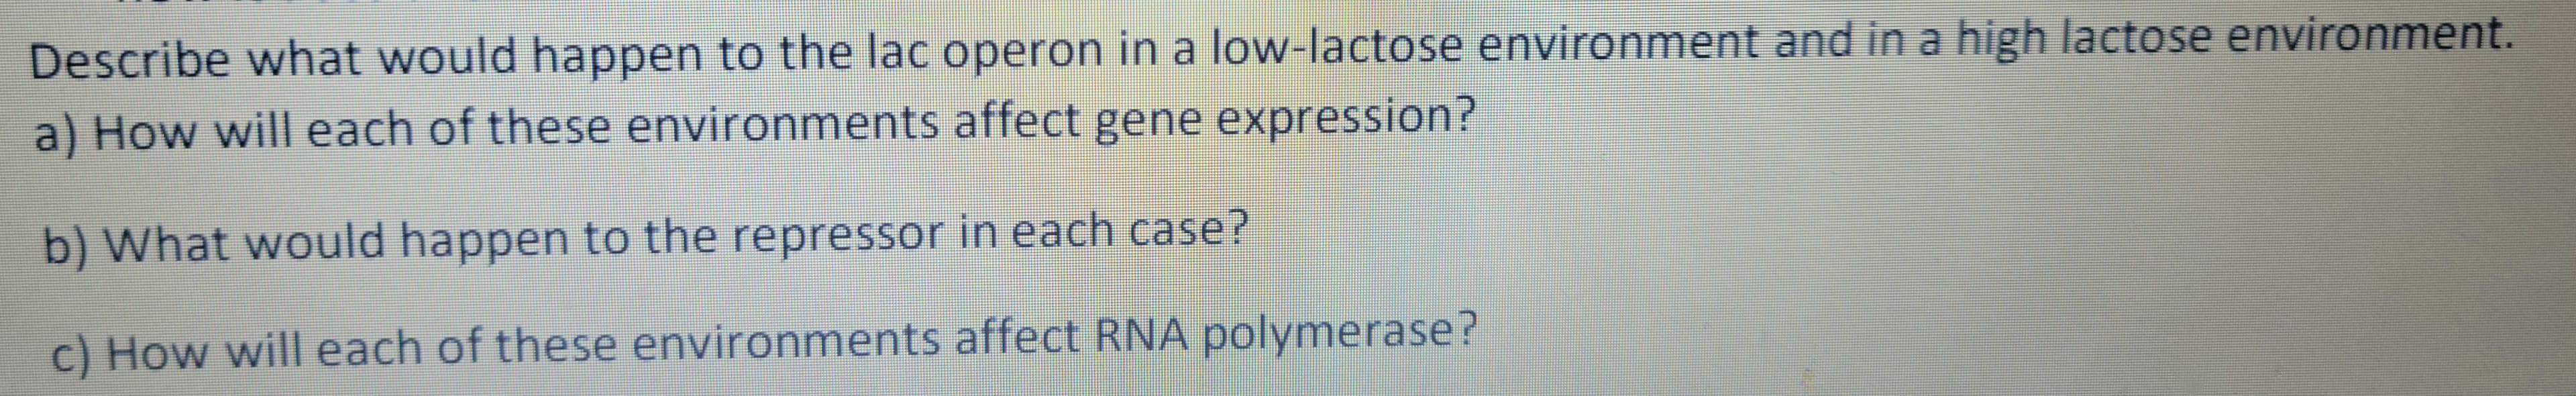 Describe what would happen to the lac operon in a low-lactose environment and in a high lactose environment.
a) How will each of these environments affect gene expression?
b) What would happen to the repressor in each case?
c) How will each of these environments affect RNA polymerase?
